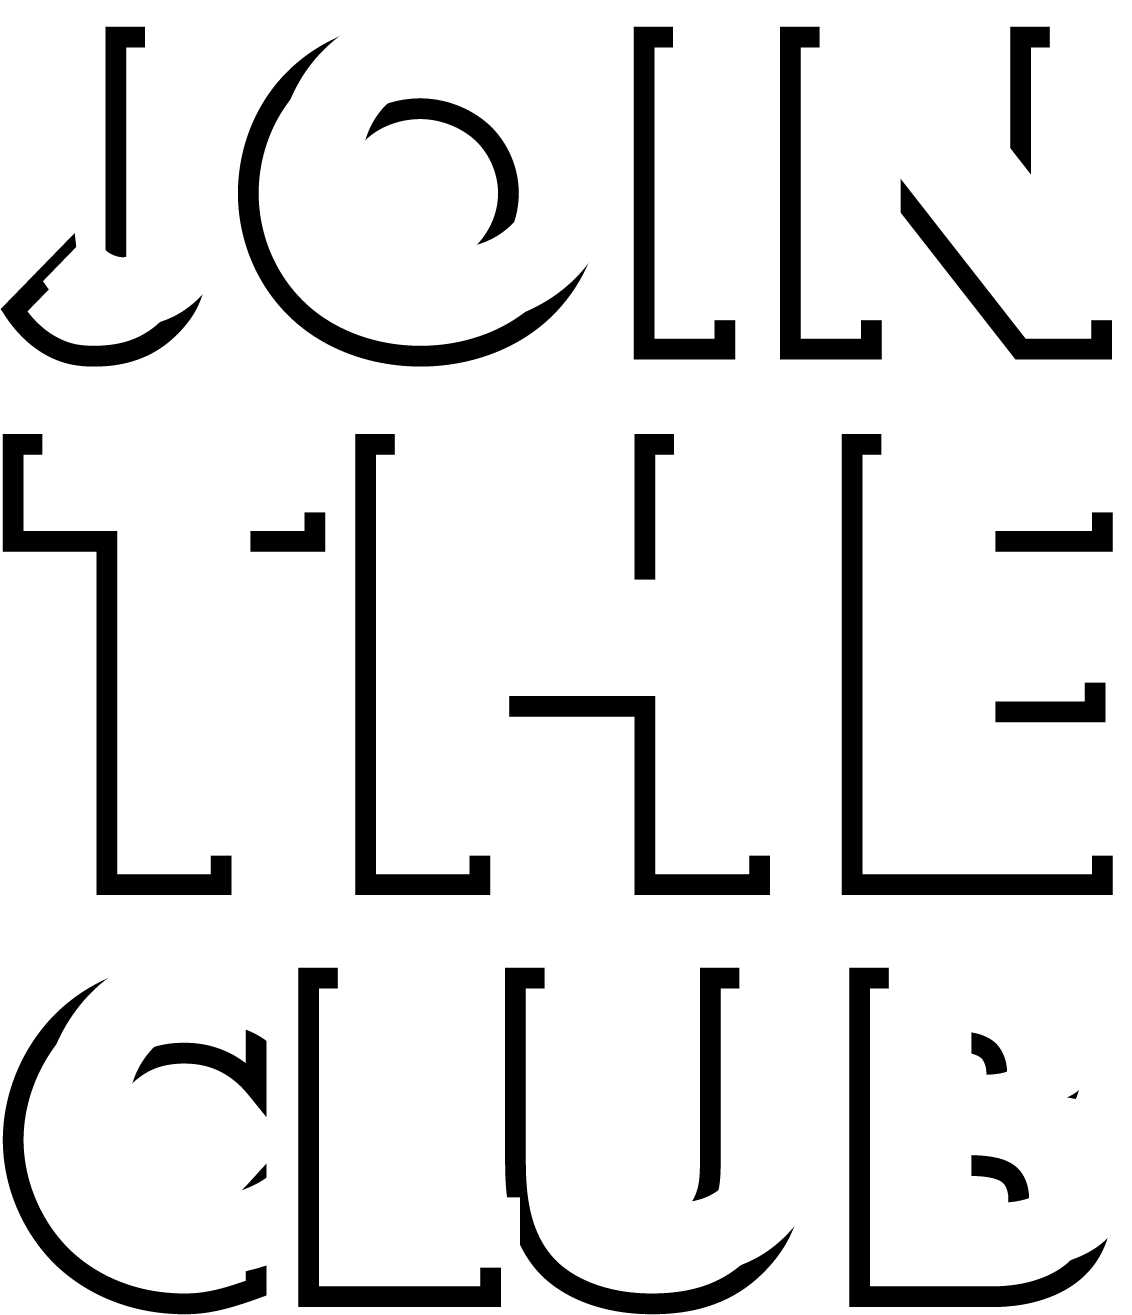 Join The Club!